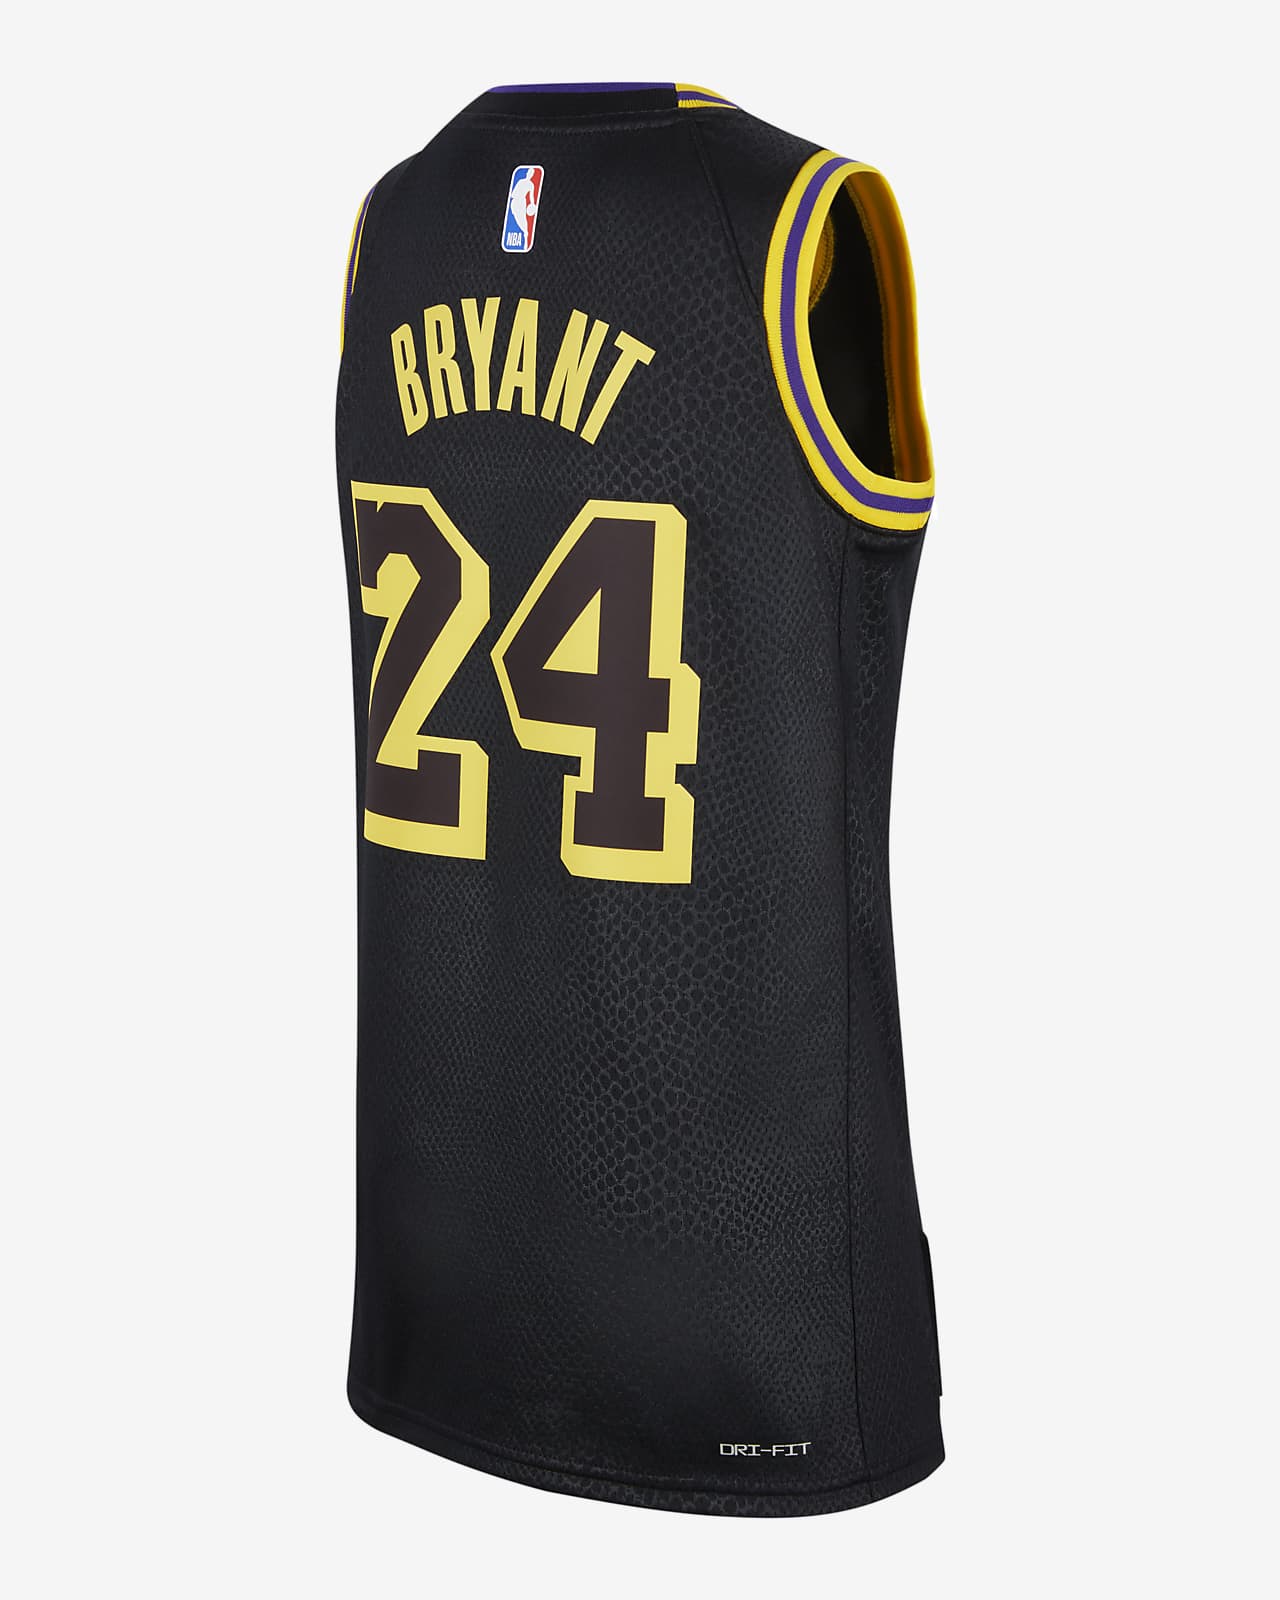 Lakers toddler jersey